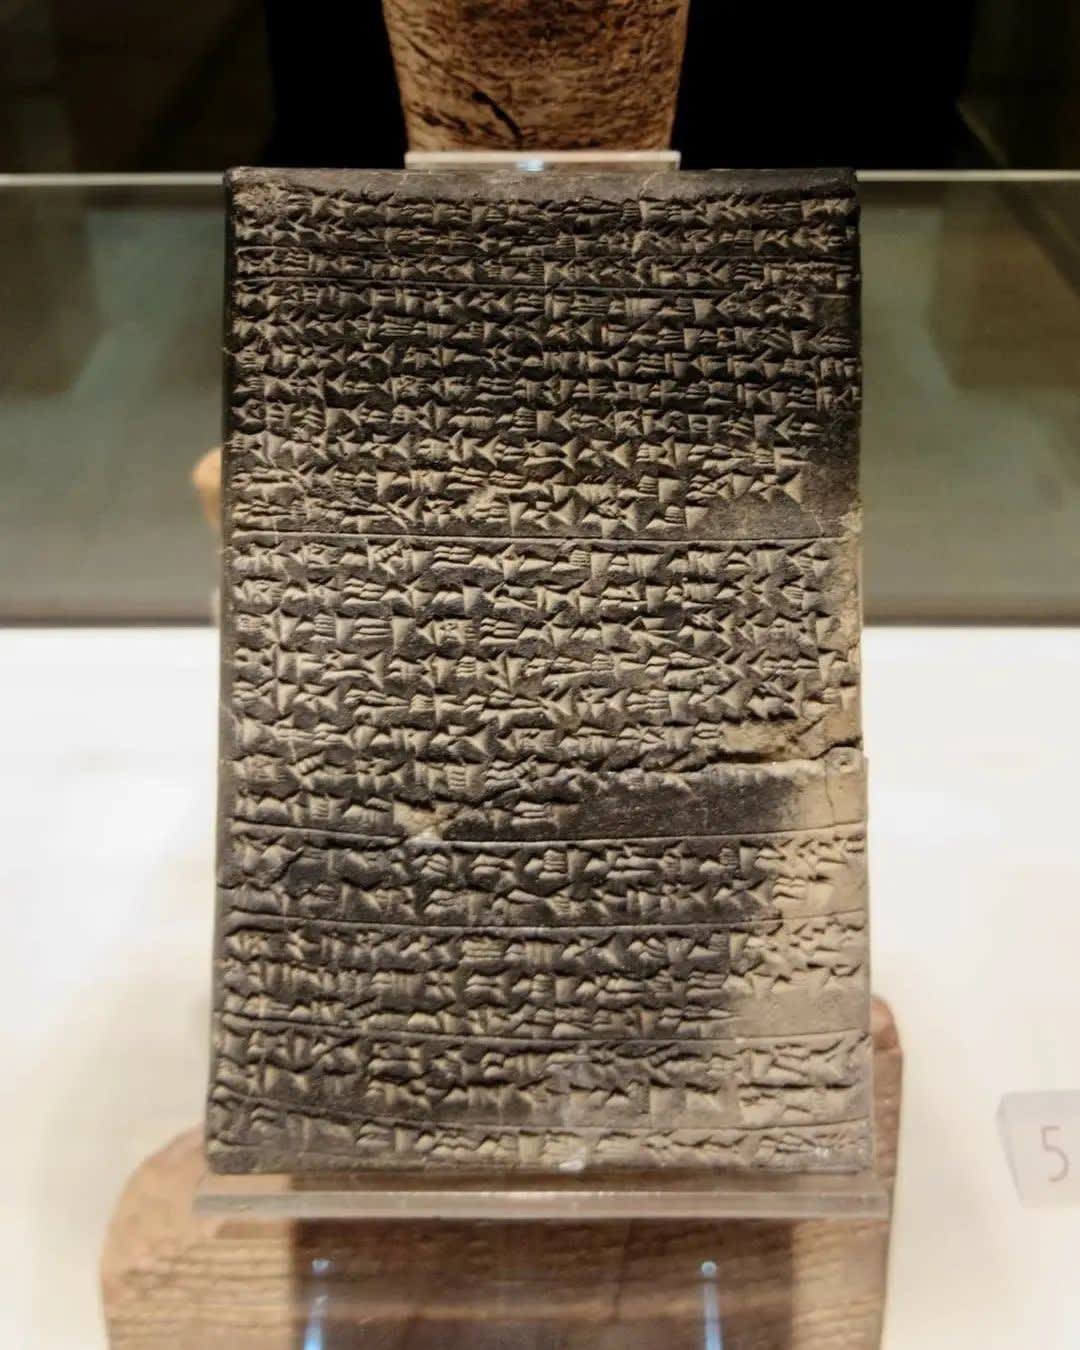 A letter written in Akkadian by Naptera, the wife of Ramses II, the king of Egypt, to Puduhepa, the wife of Hattusili III, the King of Hittites, between the years of 1275-1250 BC. Found in Hattusa - the capital of the Hittite Empire, now in Museum of Anatolian Civilization in Ankara.